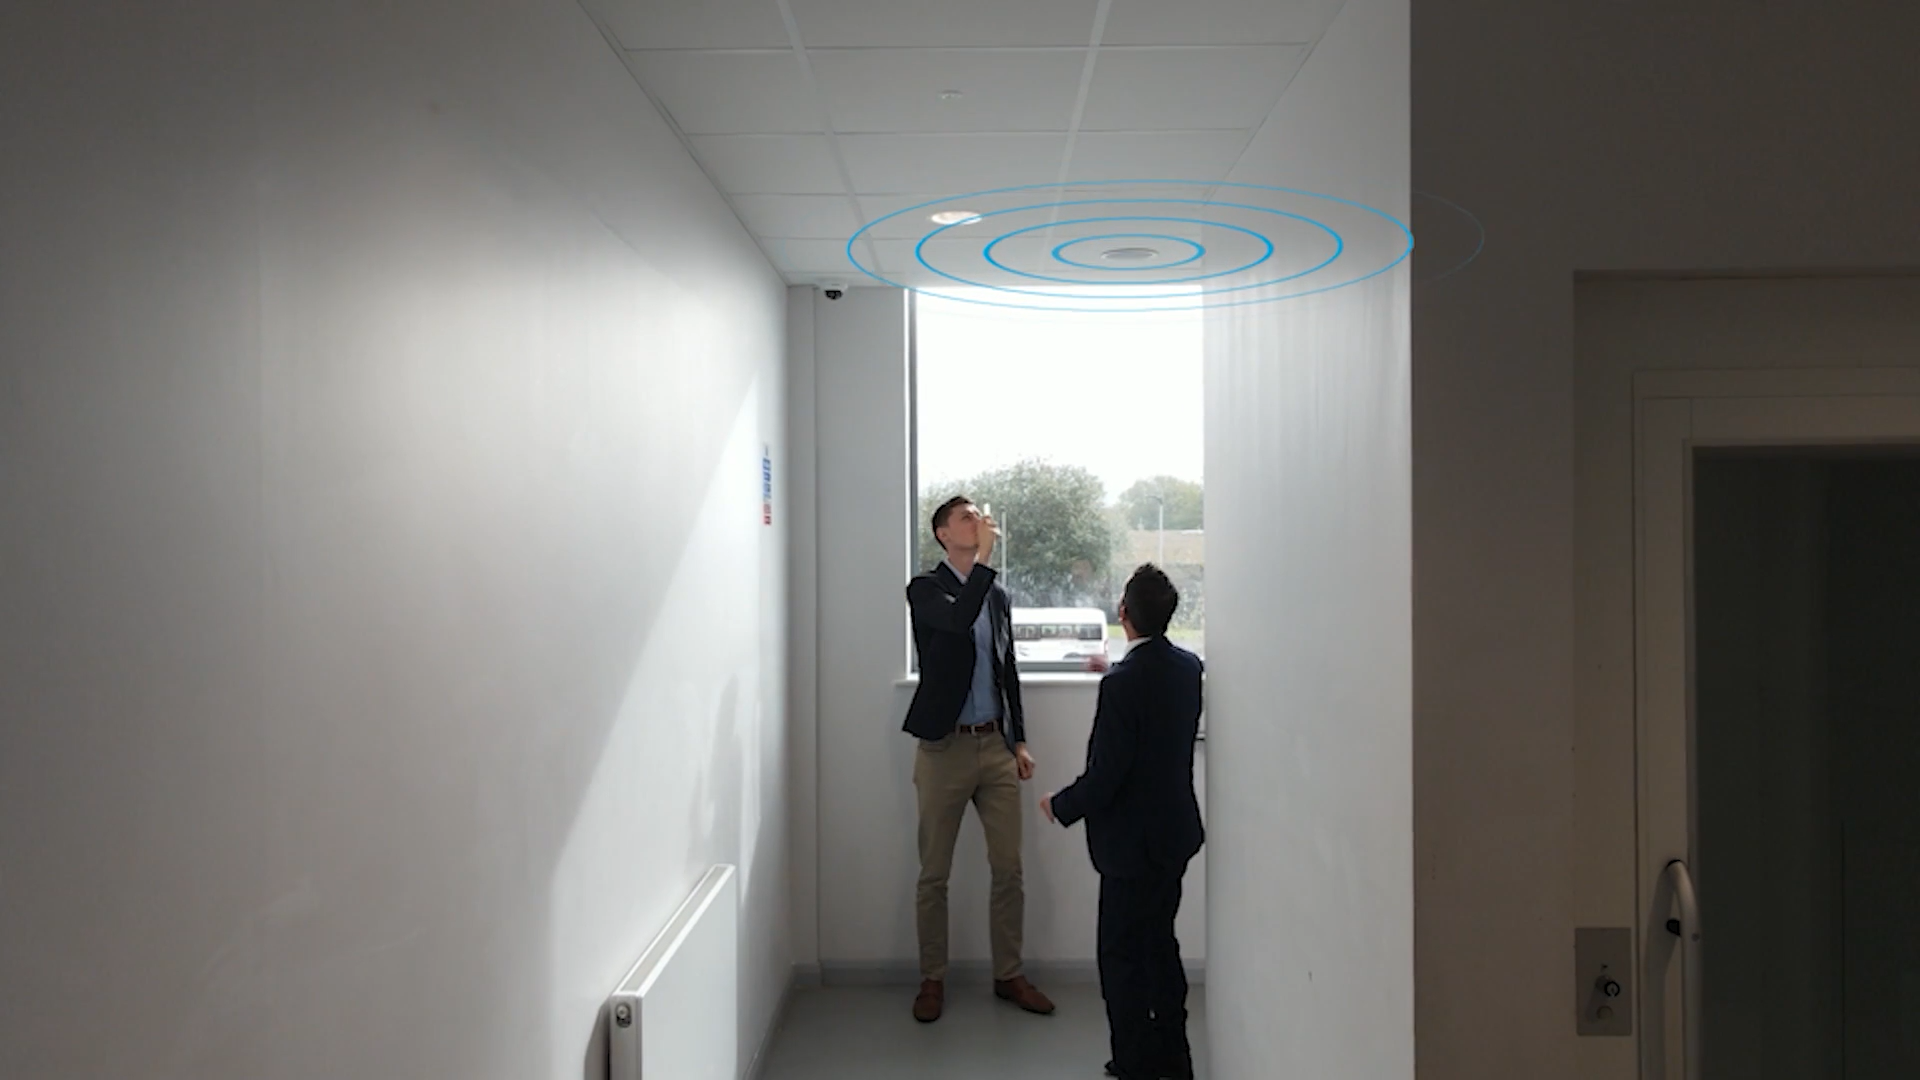 David Bury and Oscar Rowley observing a ceiling speaker at the top of a staircase in The Heights School, covering both the corridor and stairway.